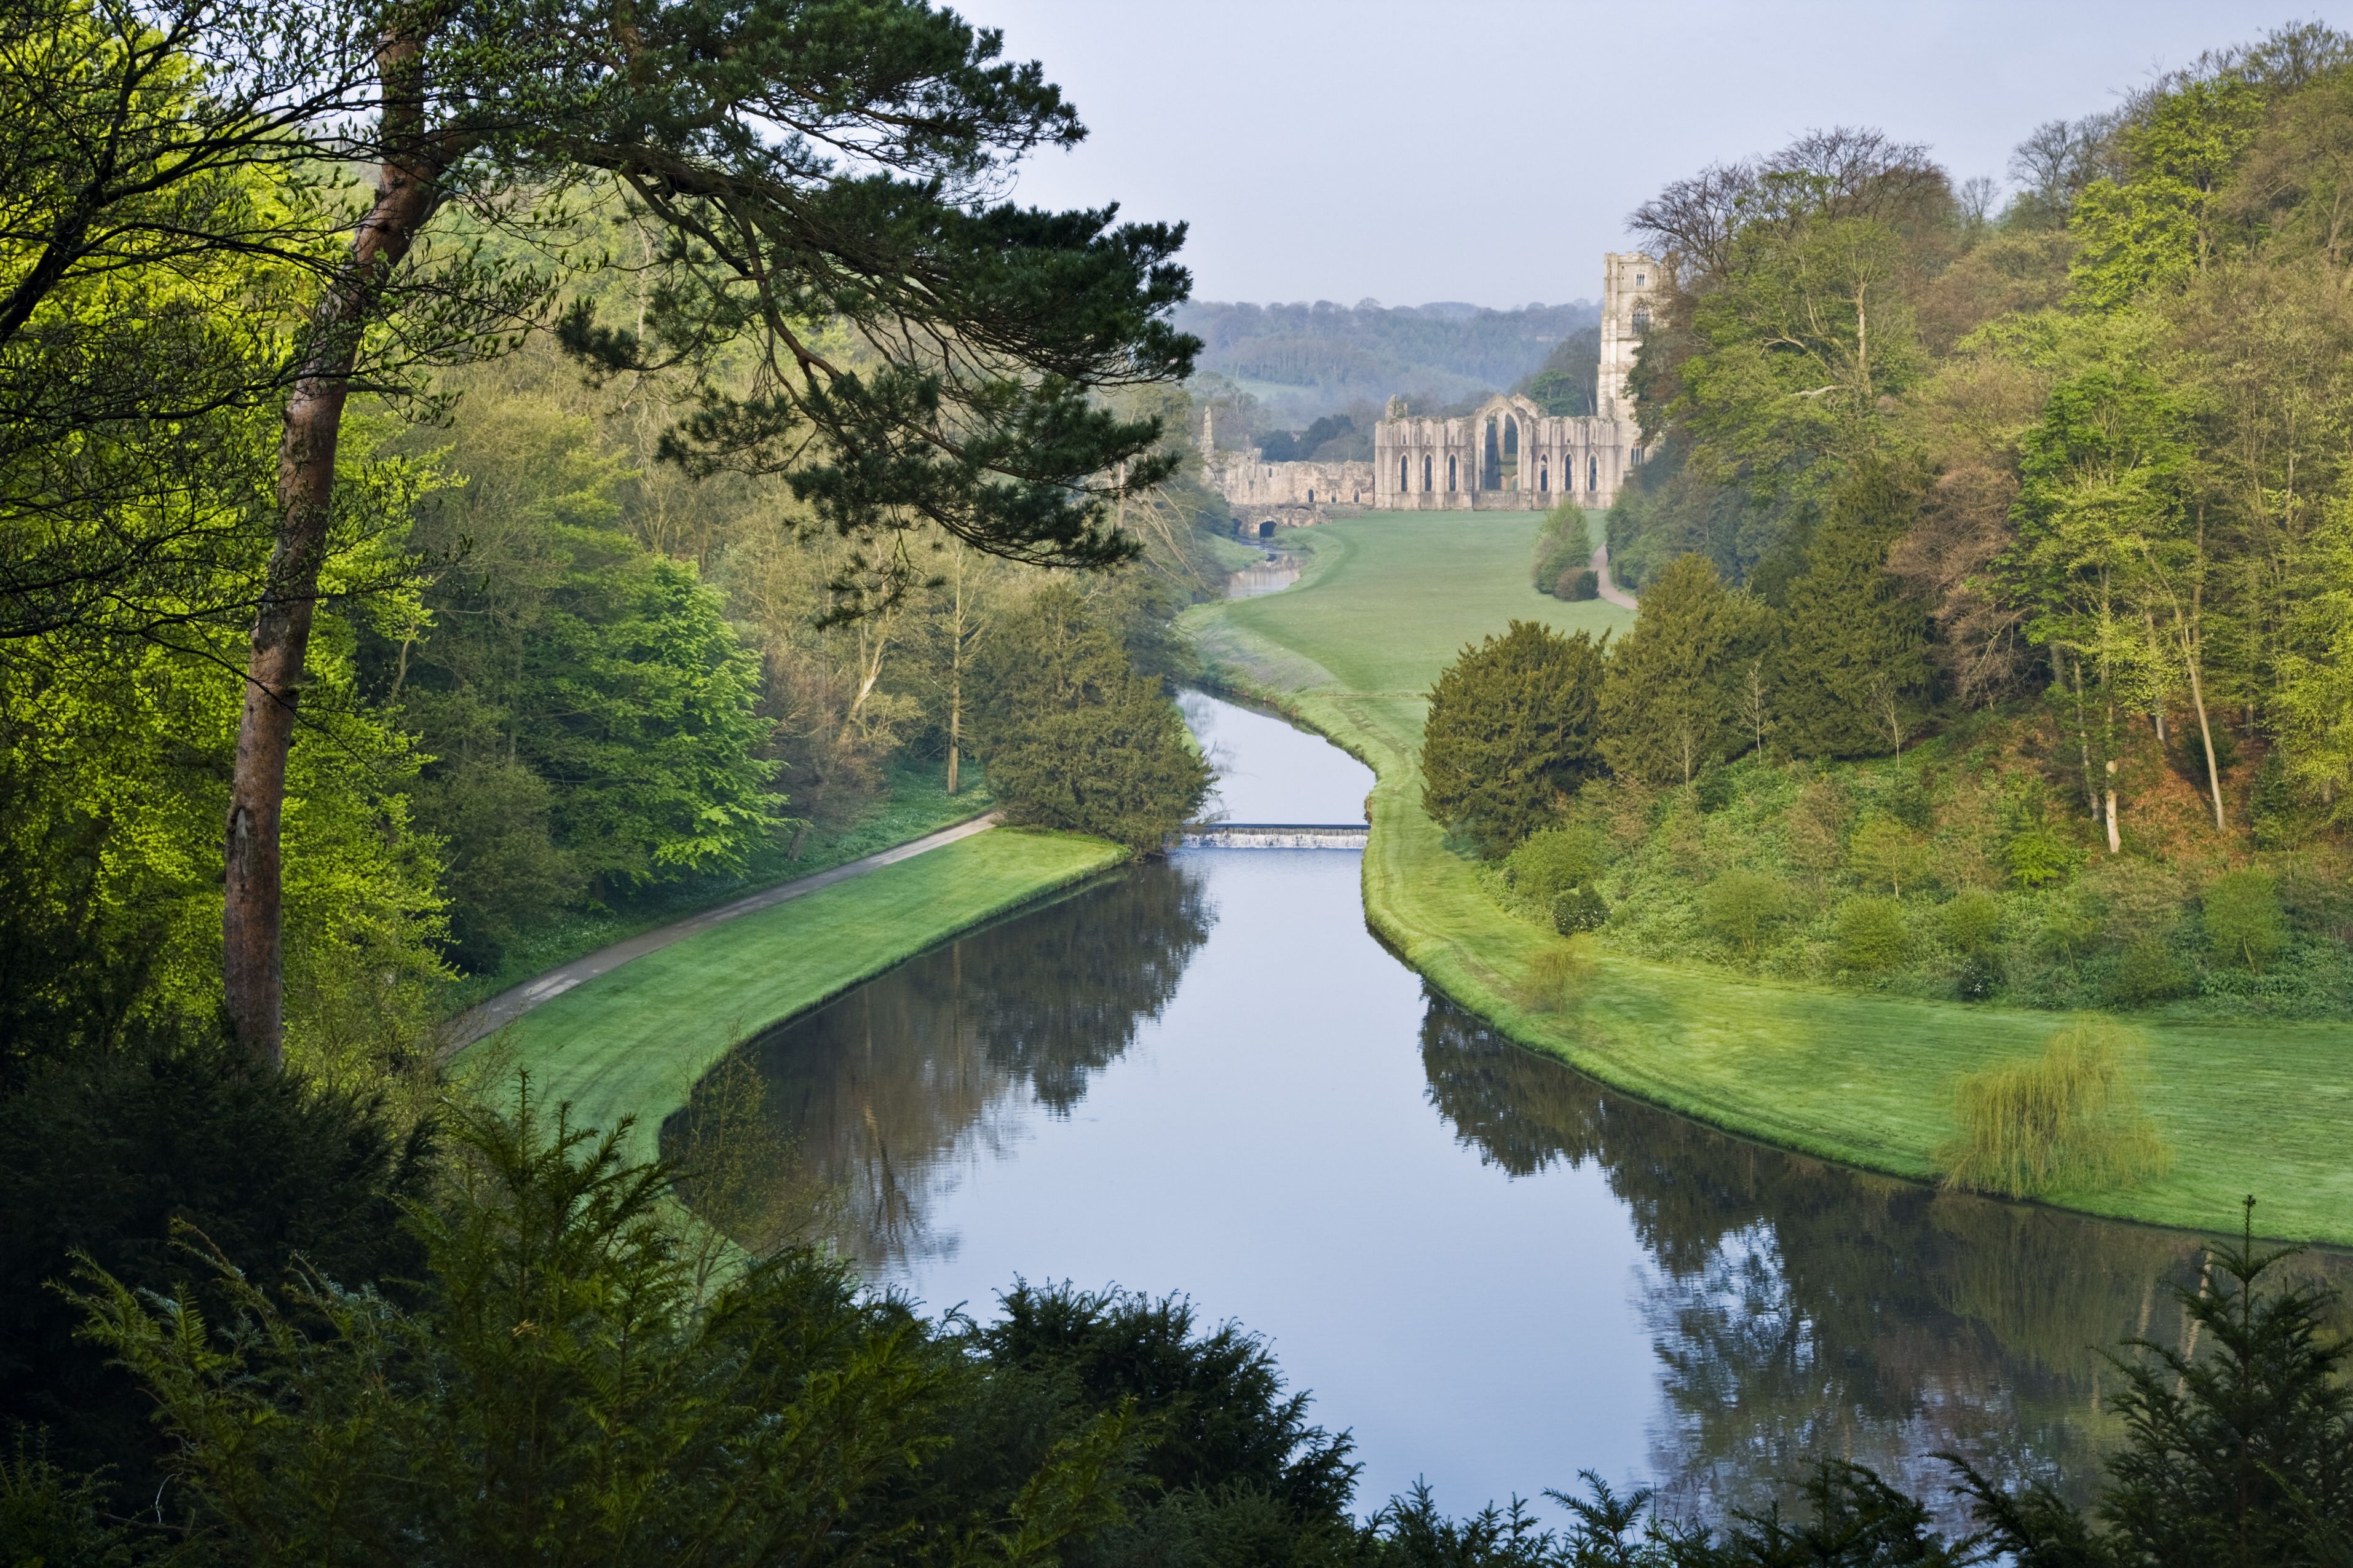 Looking over the Half Moon Pond and weir of Studley Royal Water Garden from the Surprise View towards Fountains Abbey, North Yorkshire